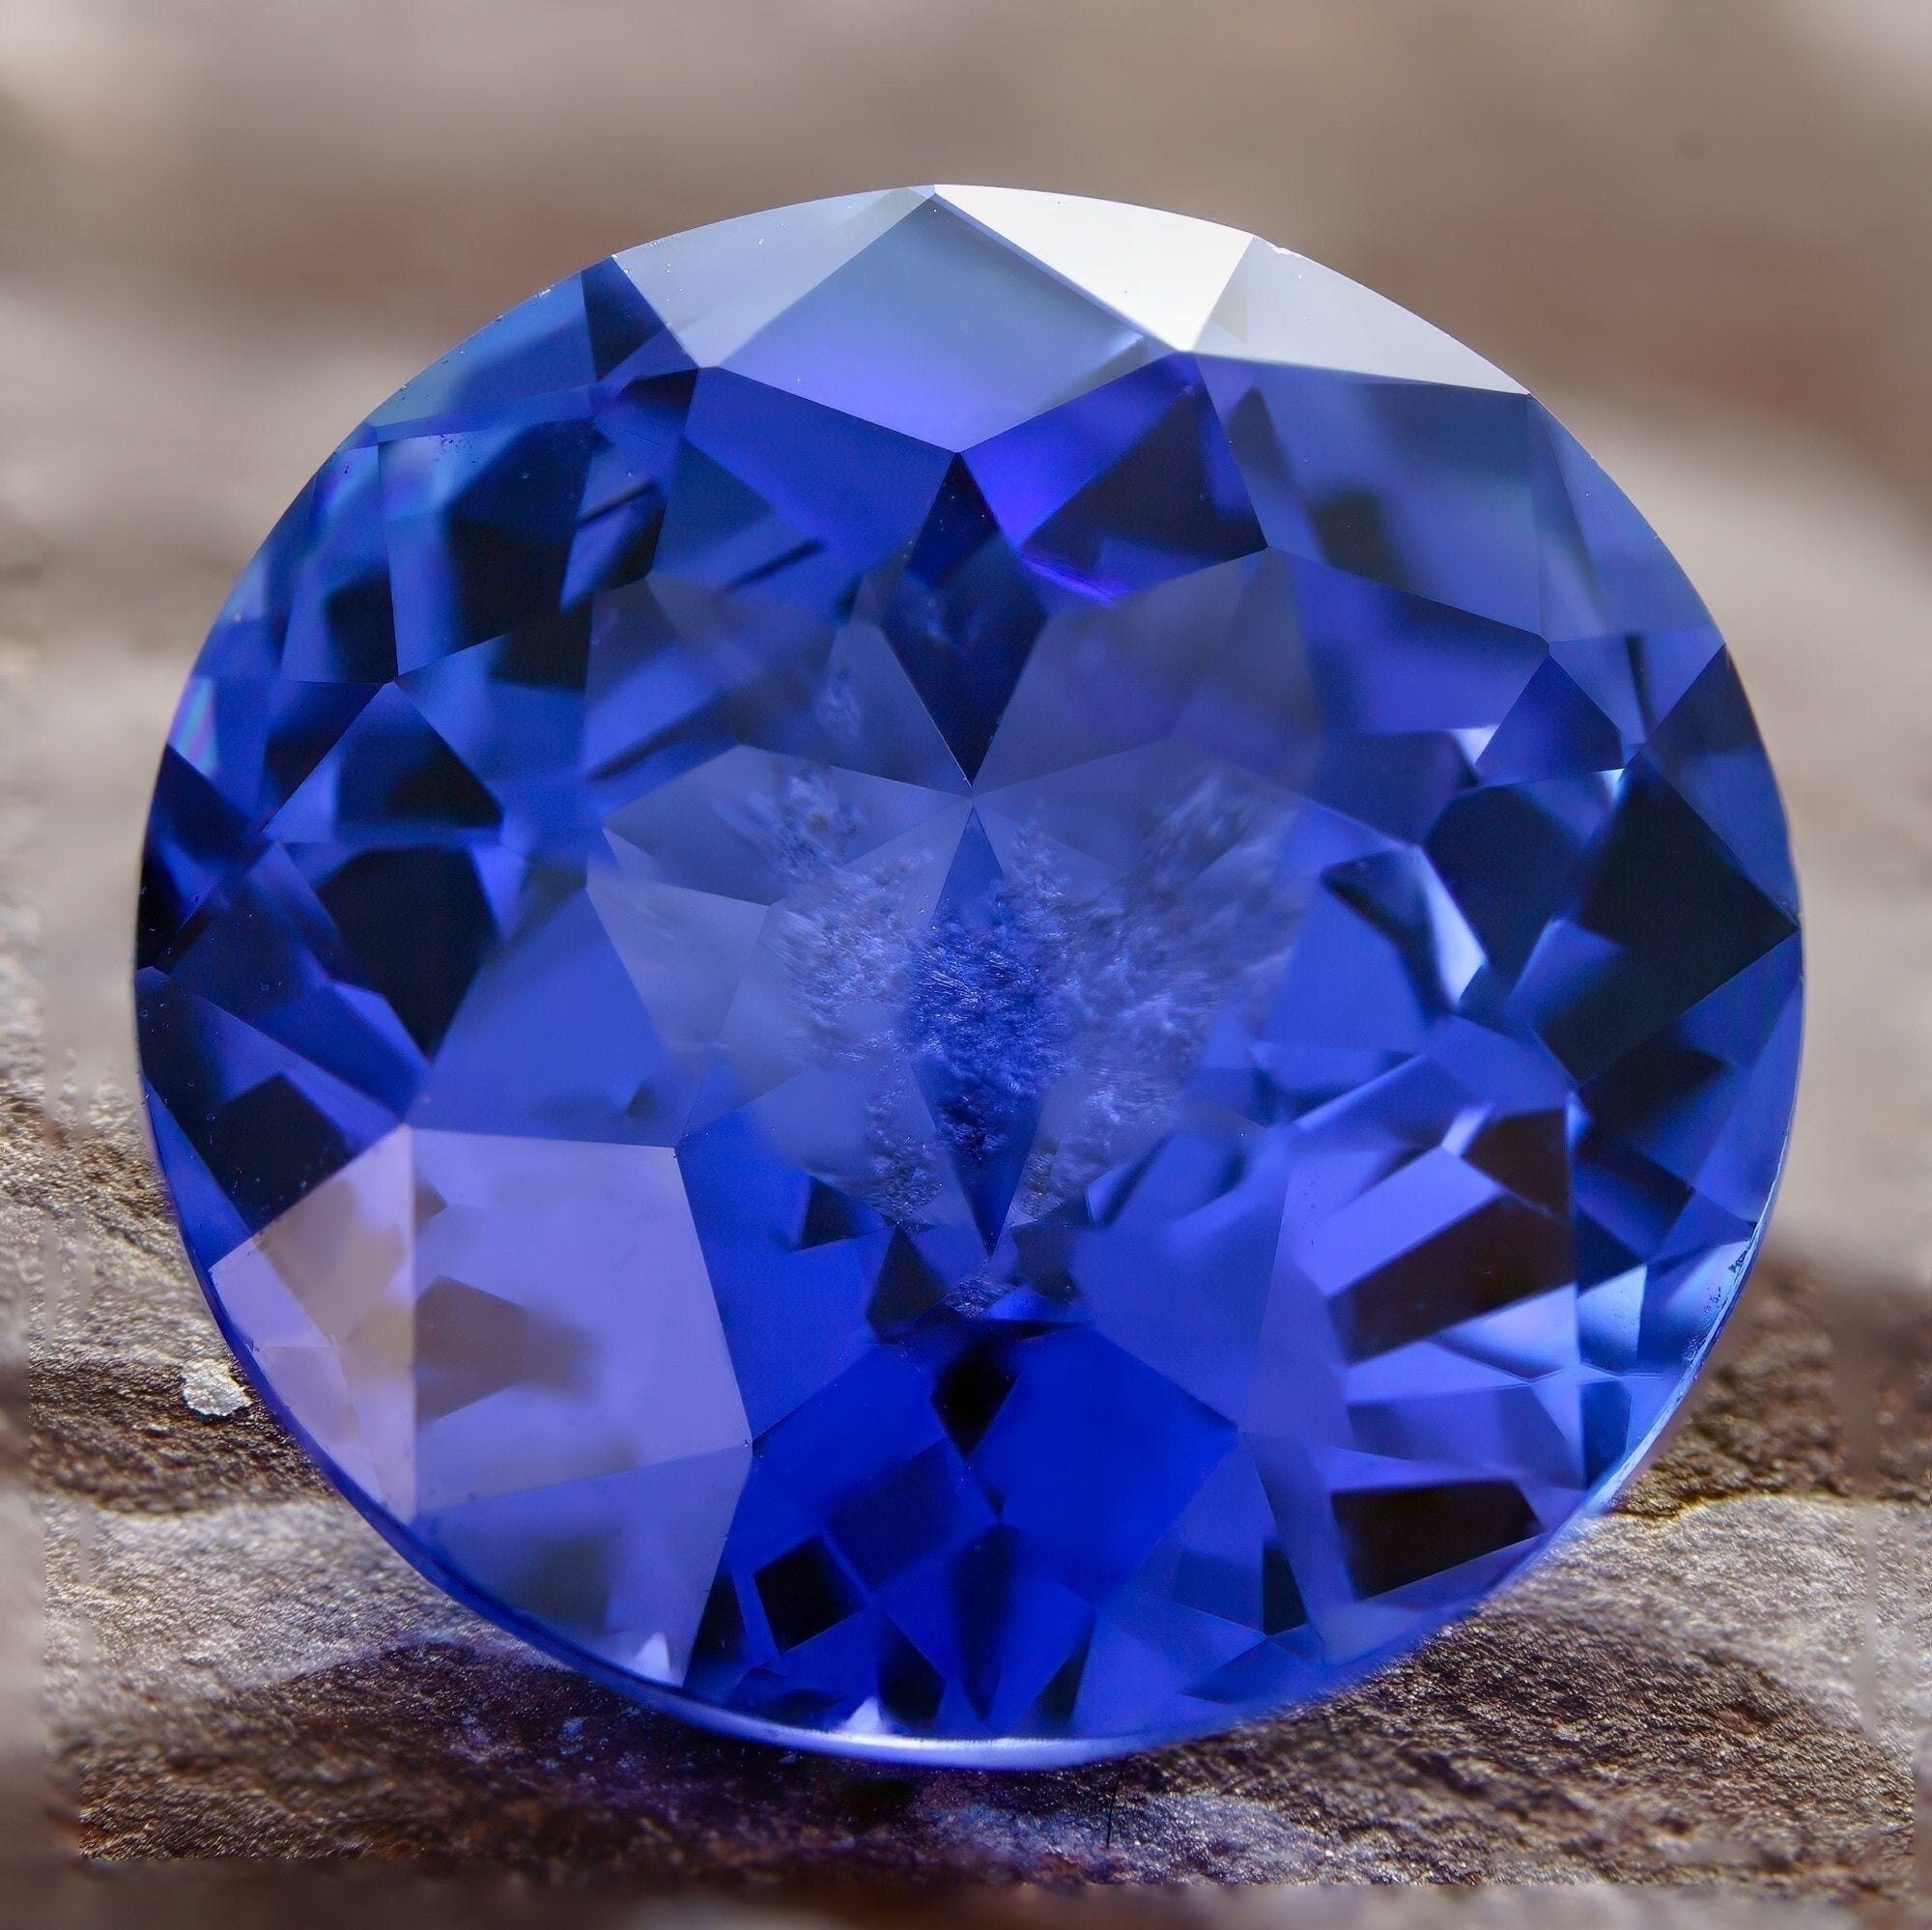 8mm loose sapphire 2.4ct lab grown imperial round faceted ceylon sapphire, blue gemstone